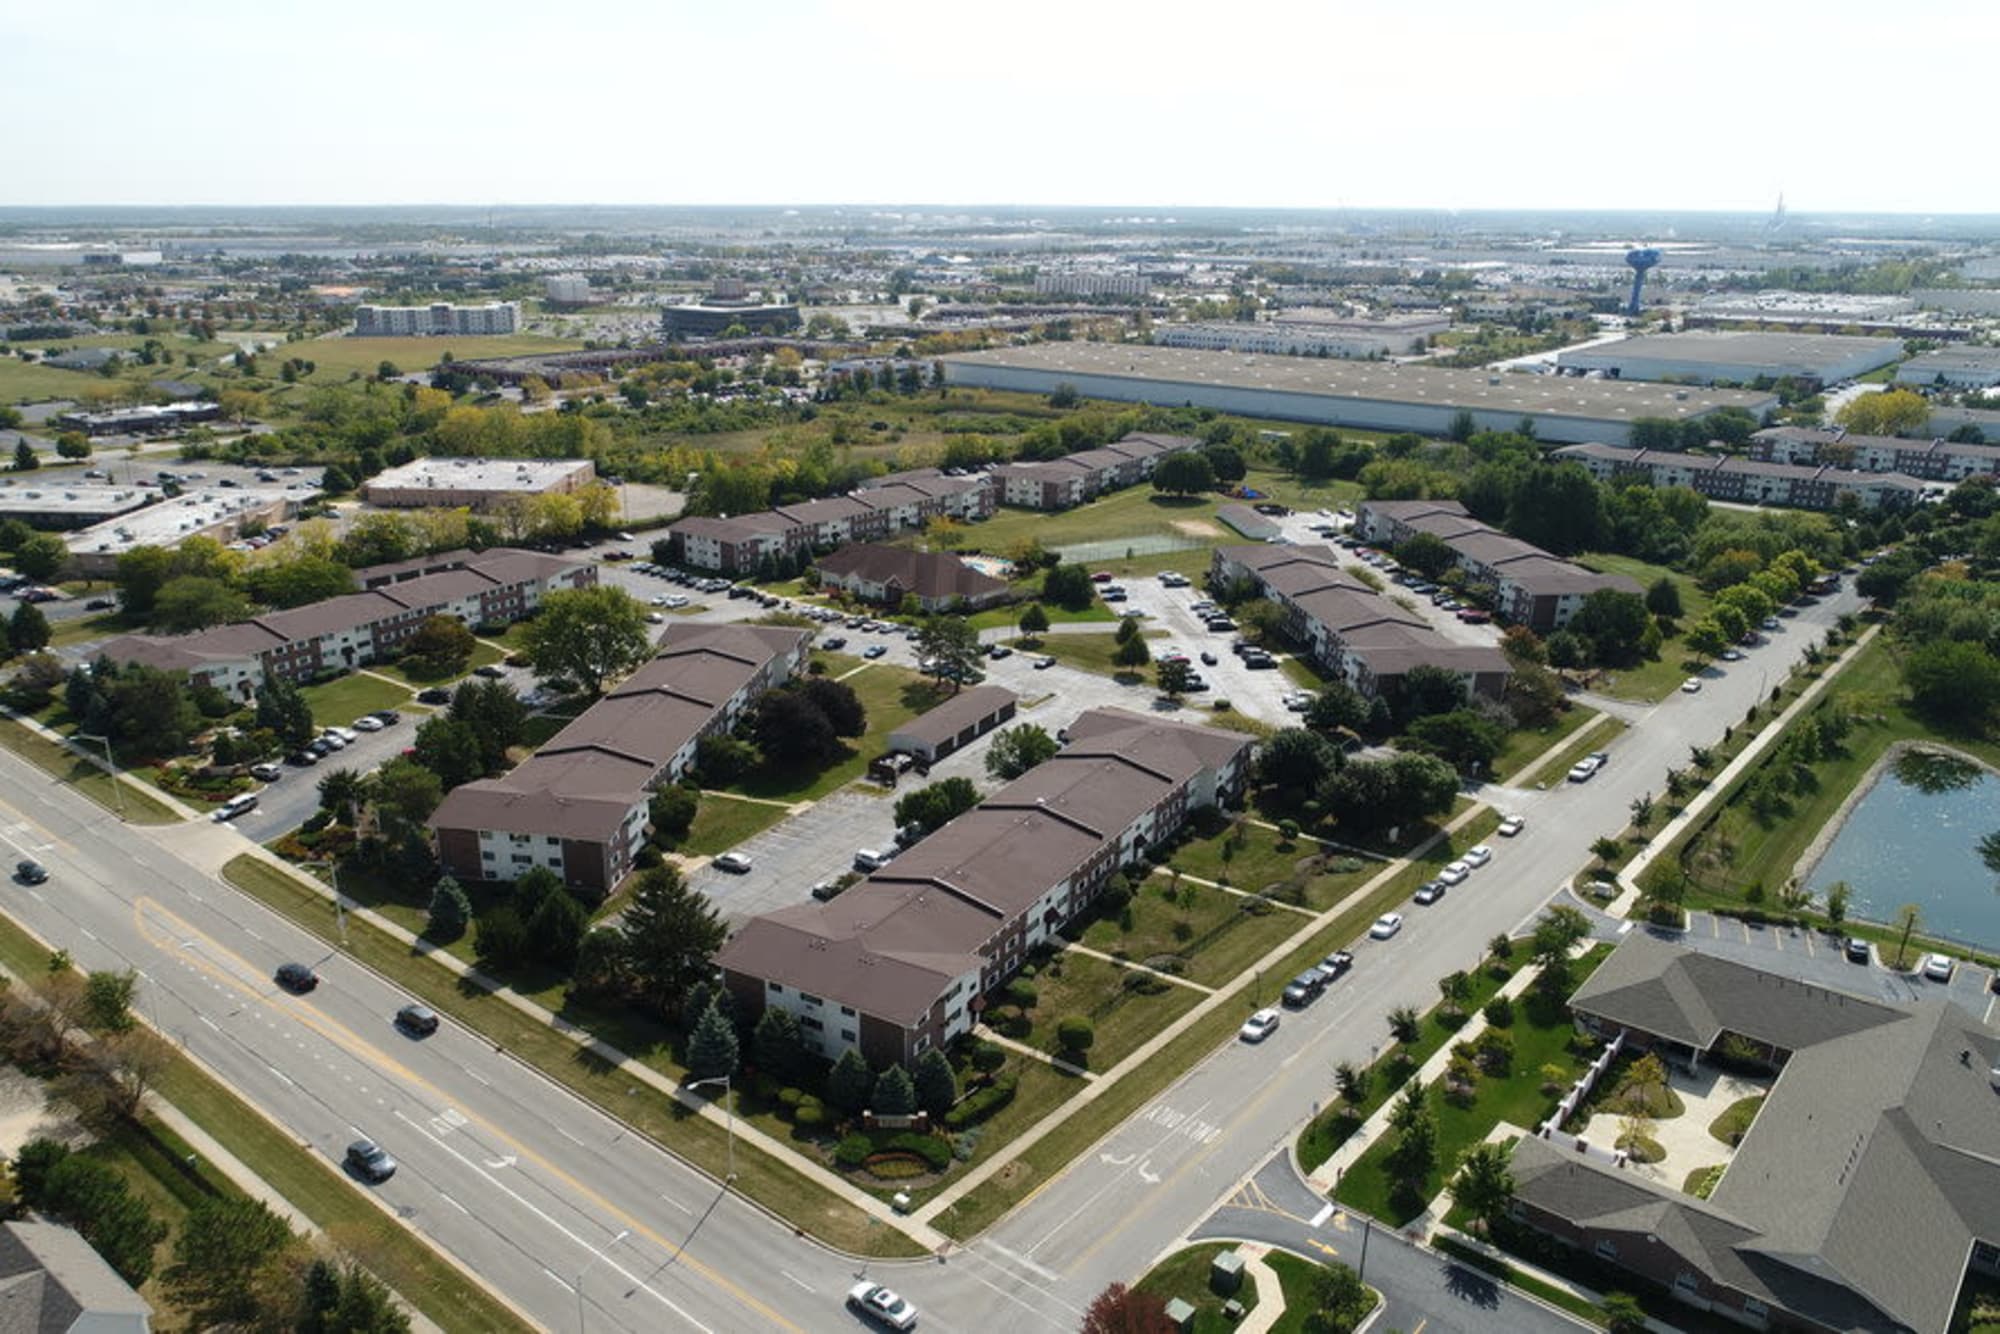 Aerial view of the property and surrounding area at Riverstone Apartments in Bolingbrook, Illinois